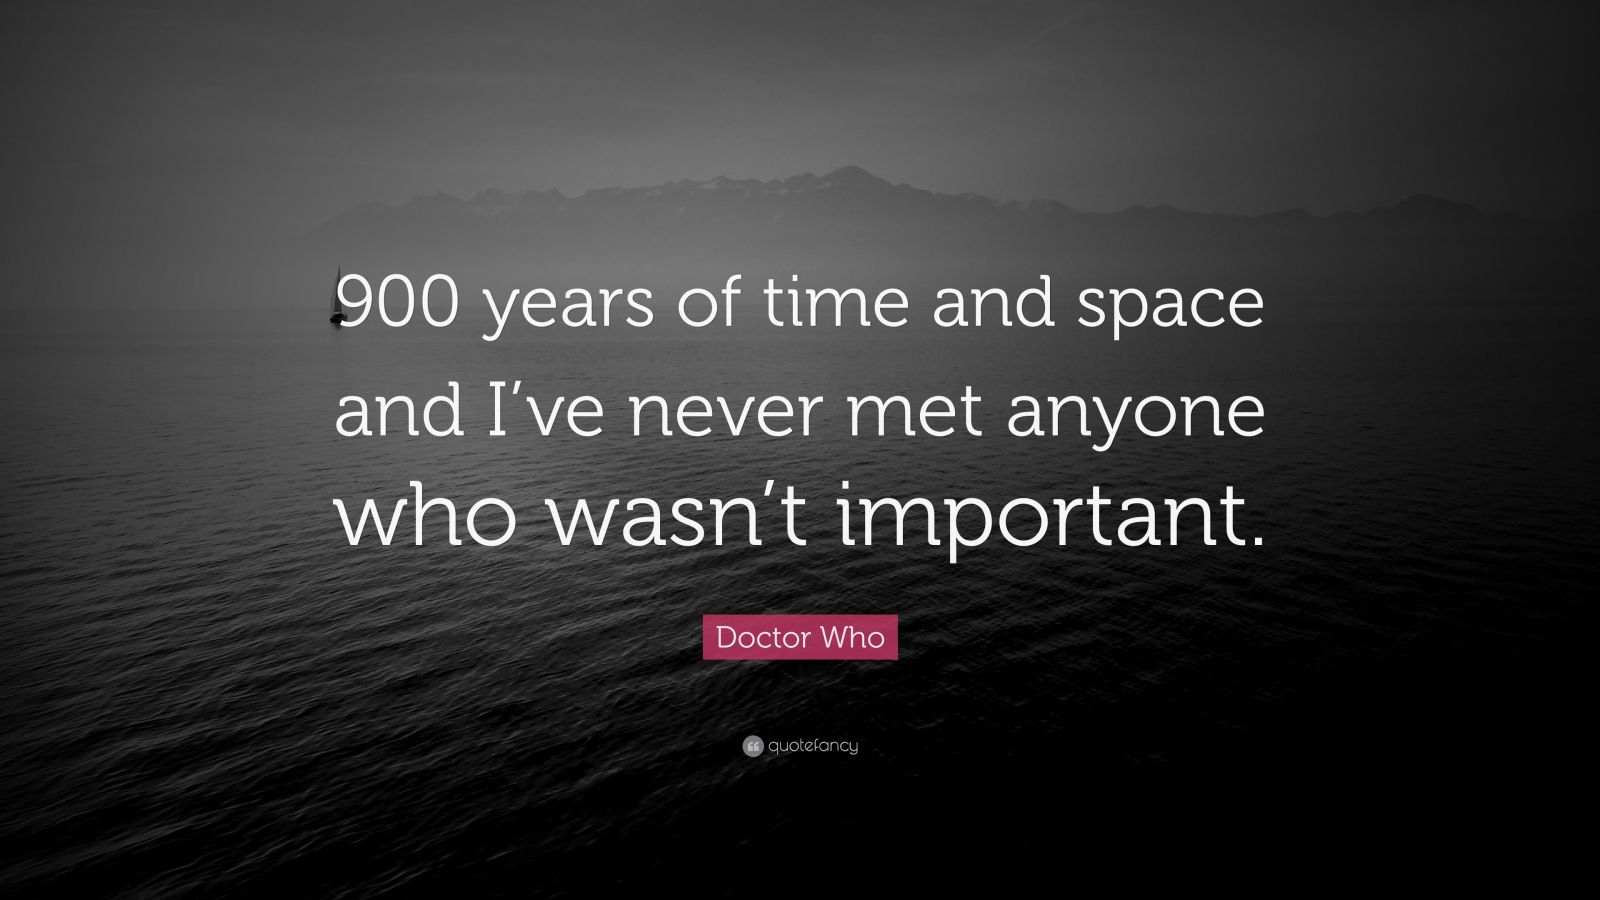 Doctor Who Quote: "900 years of time and space and I've ...